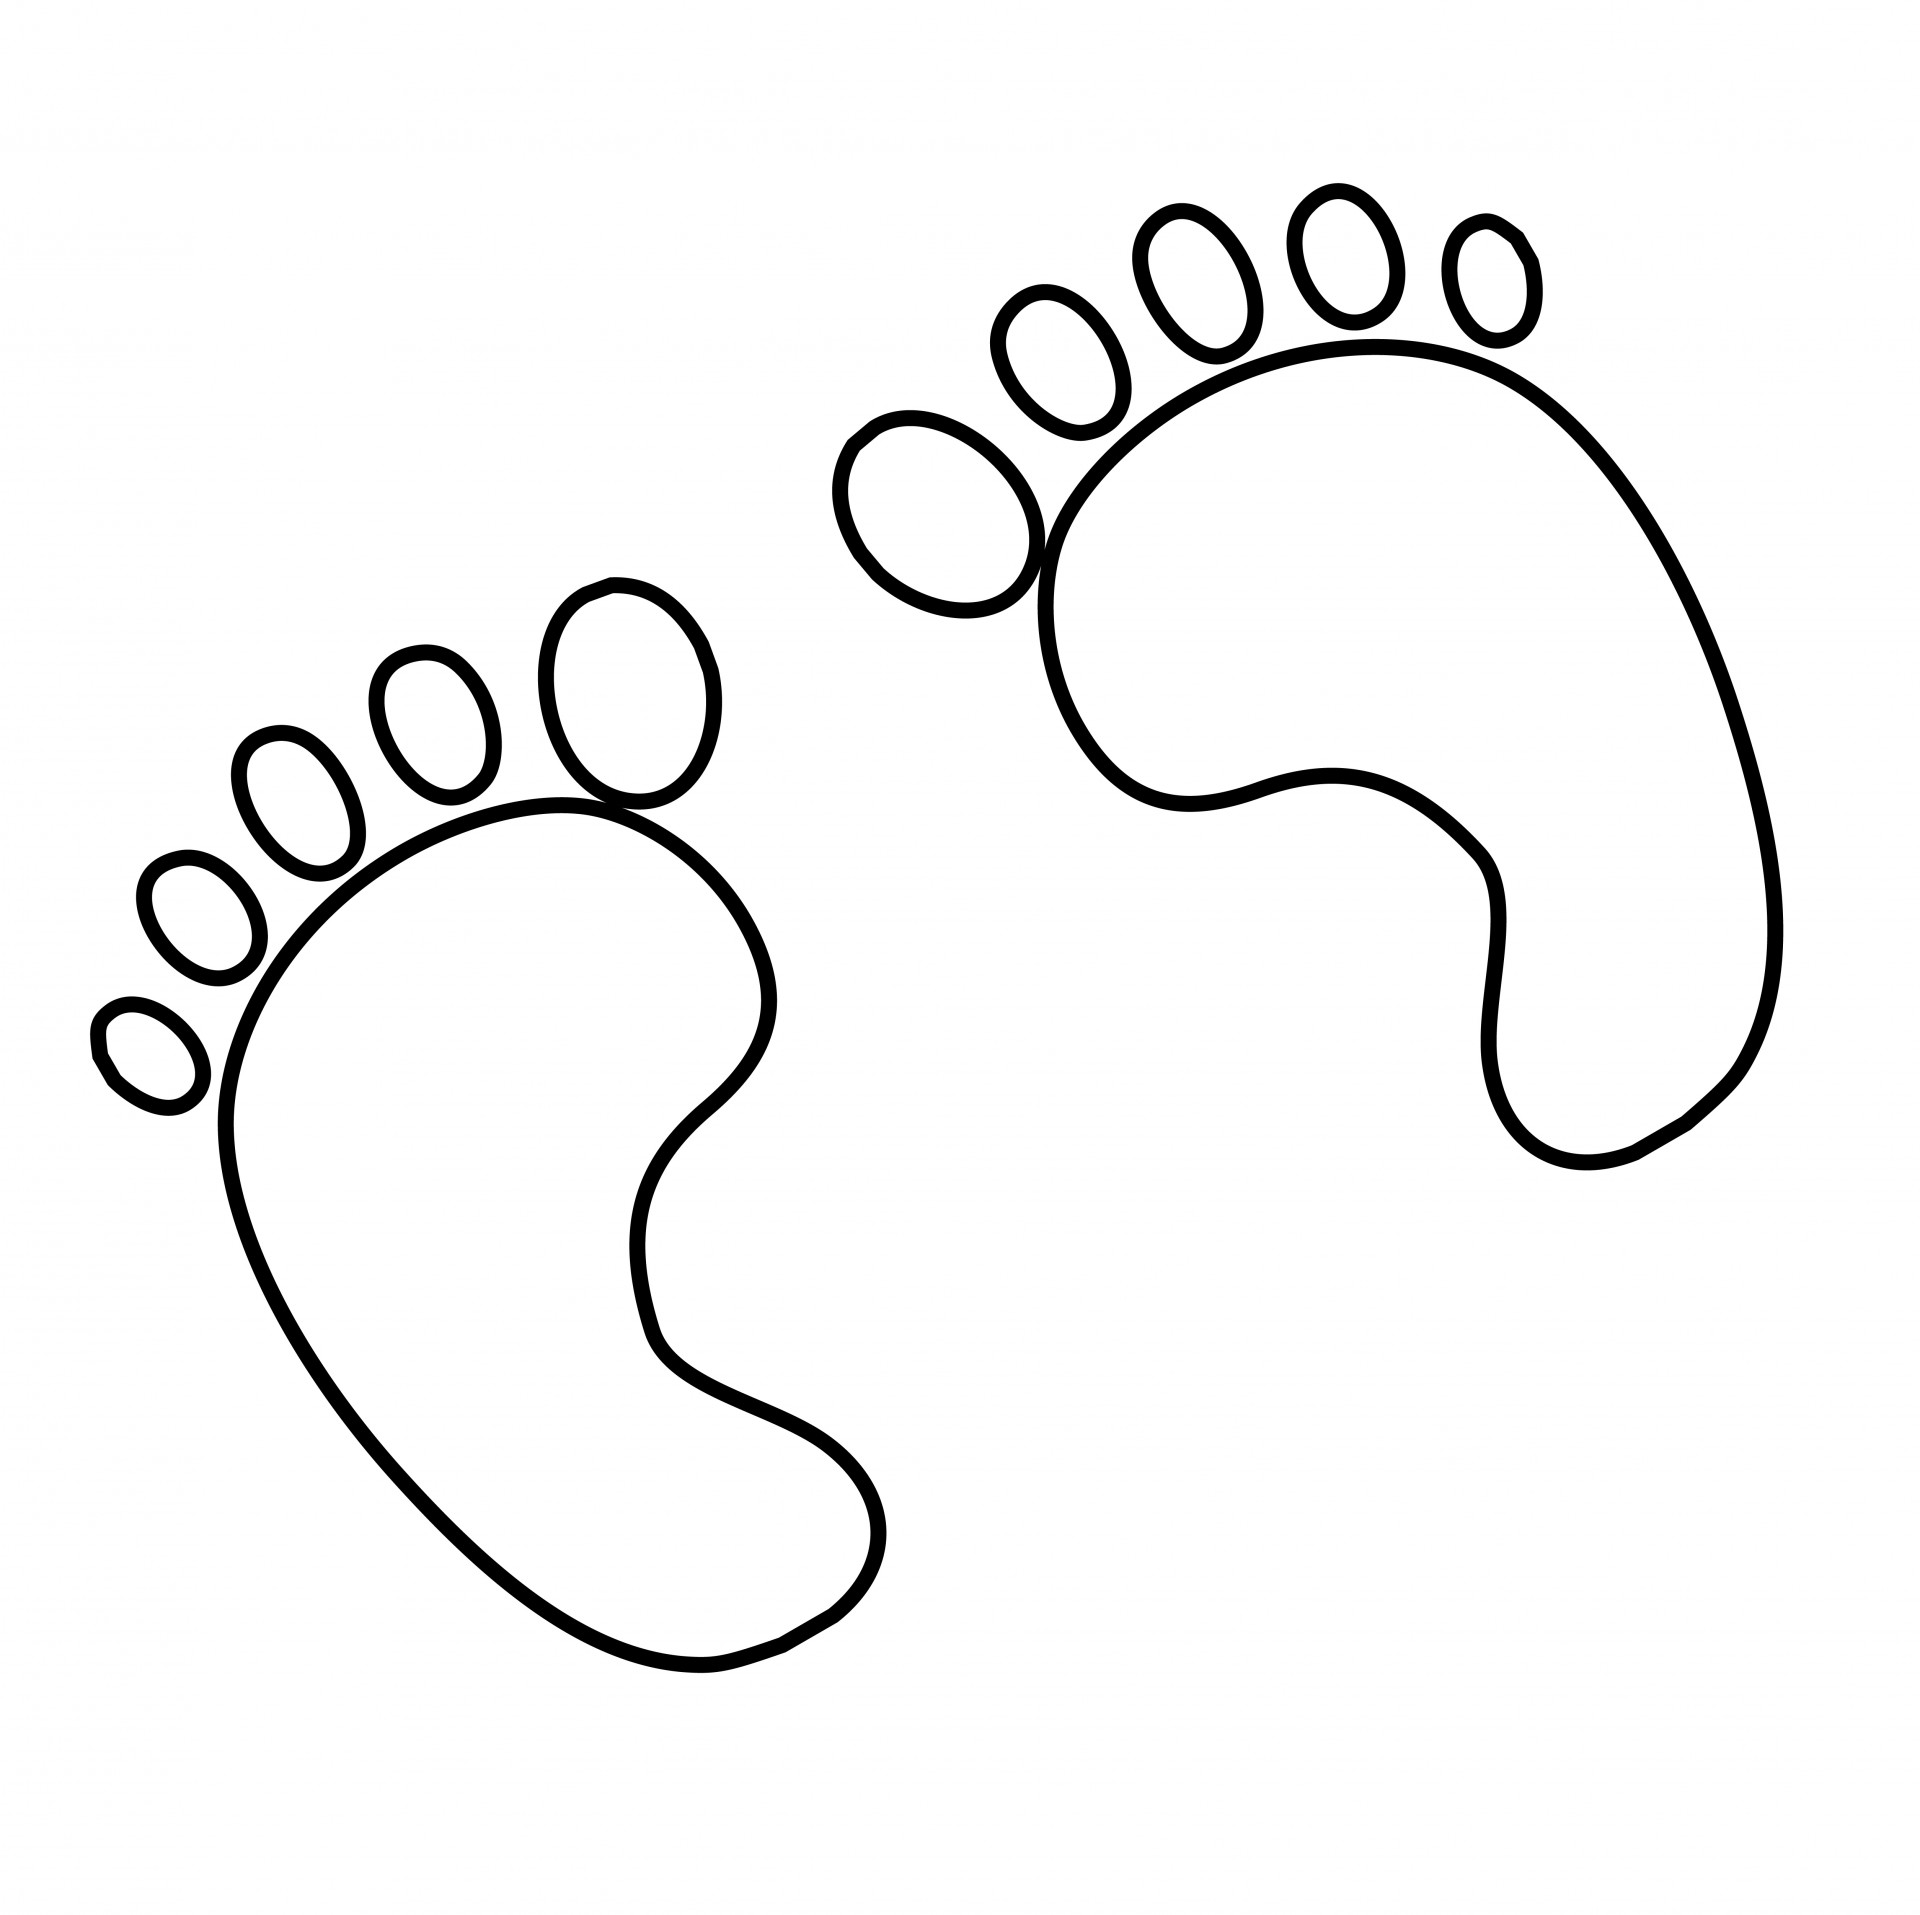 Best Photos of Baby Foot Outline - Outline Baby Footprints Clip ...